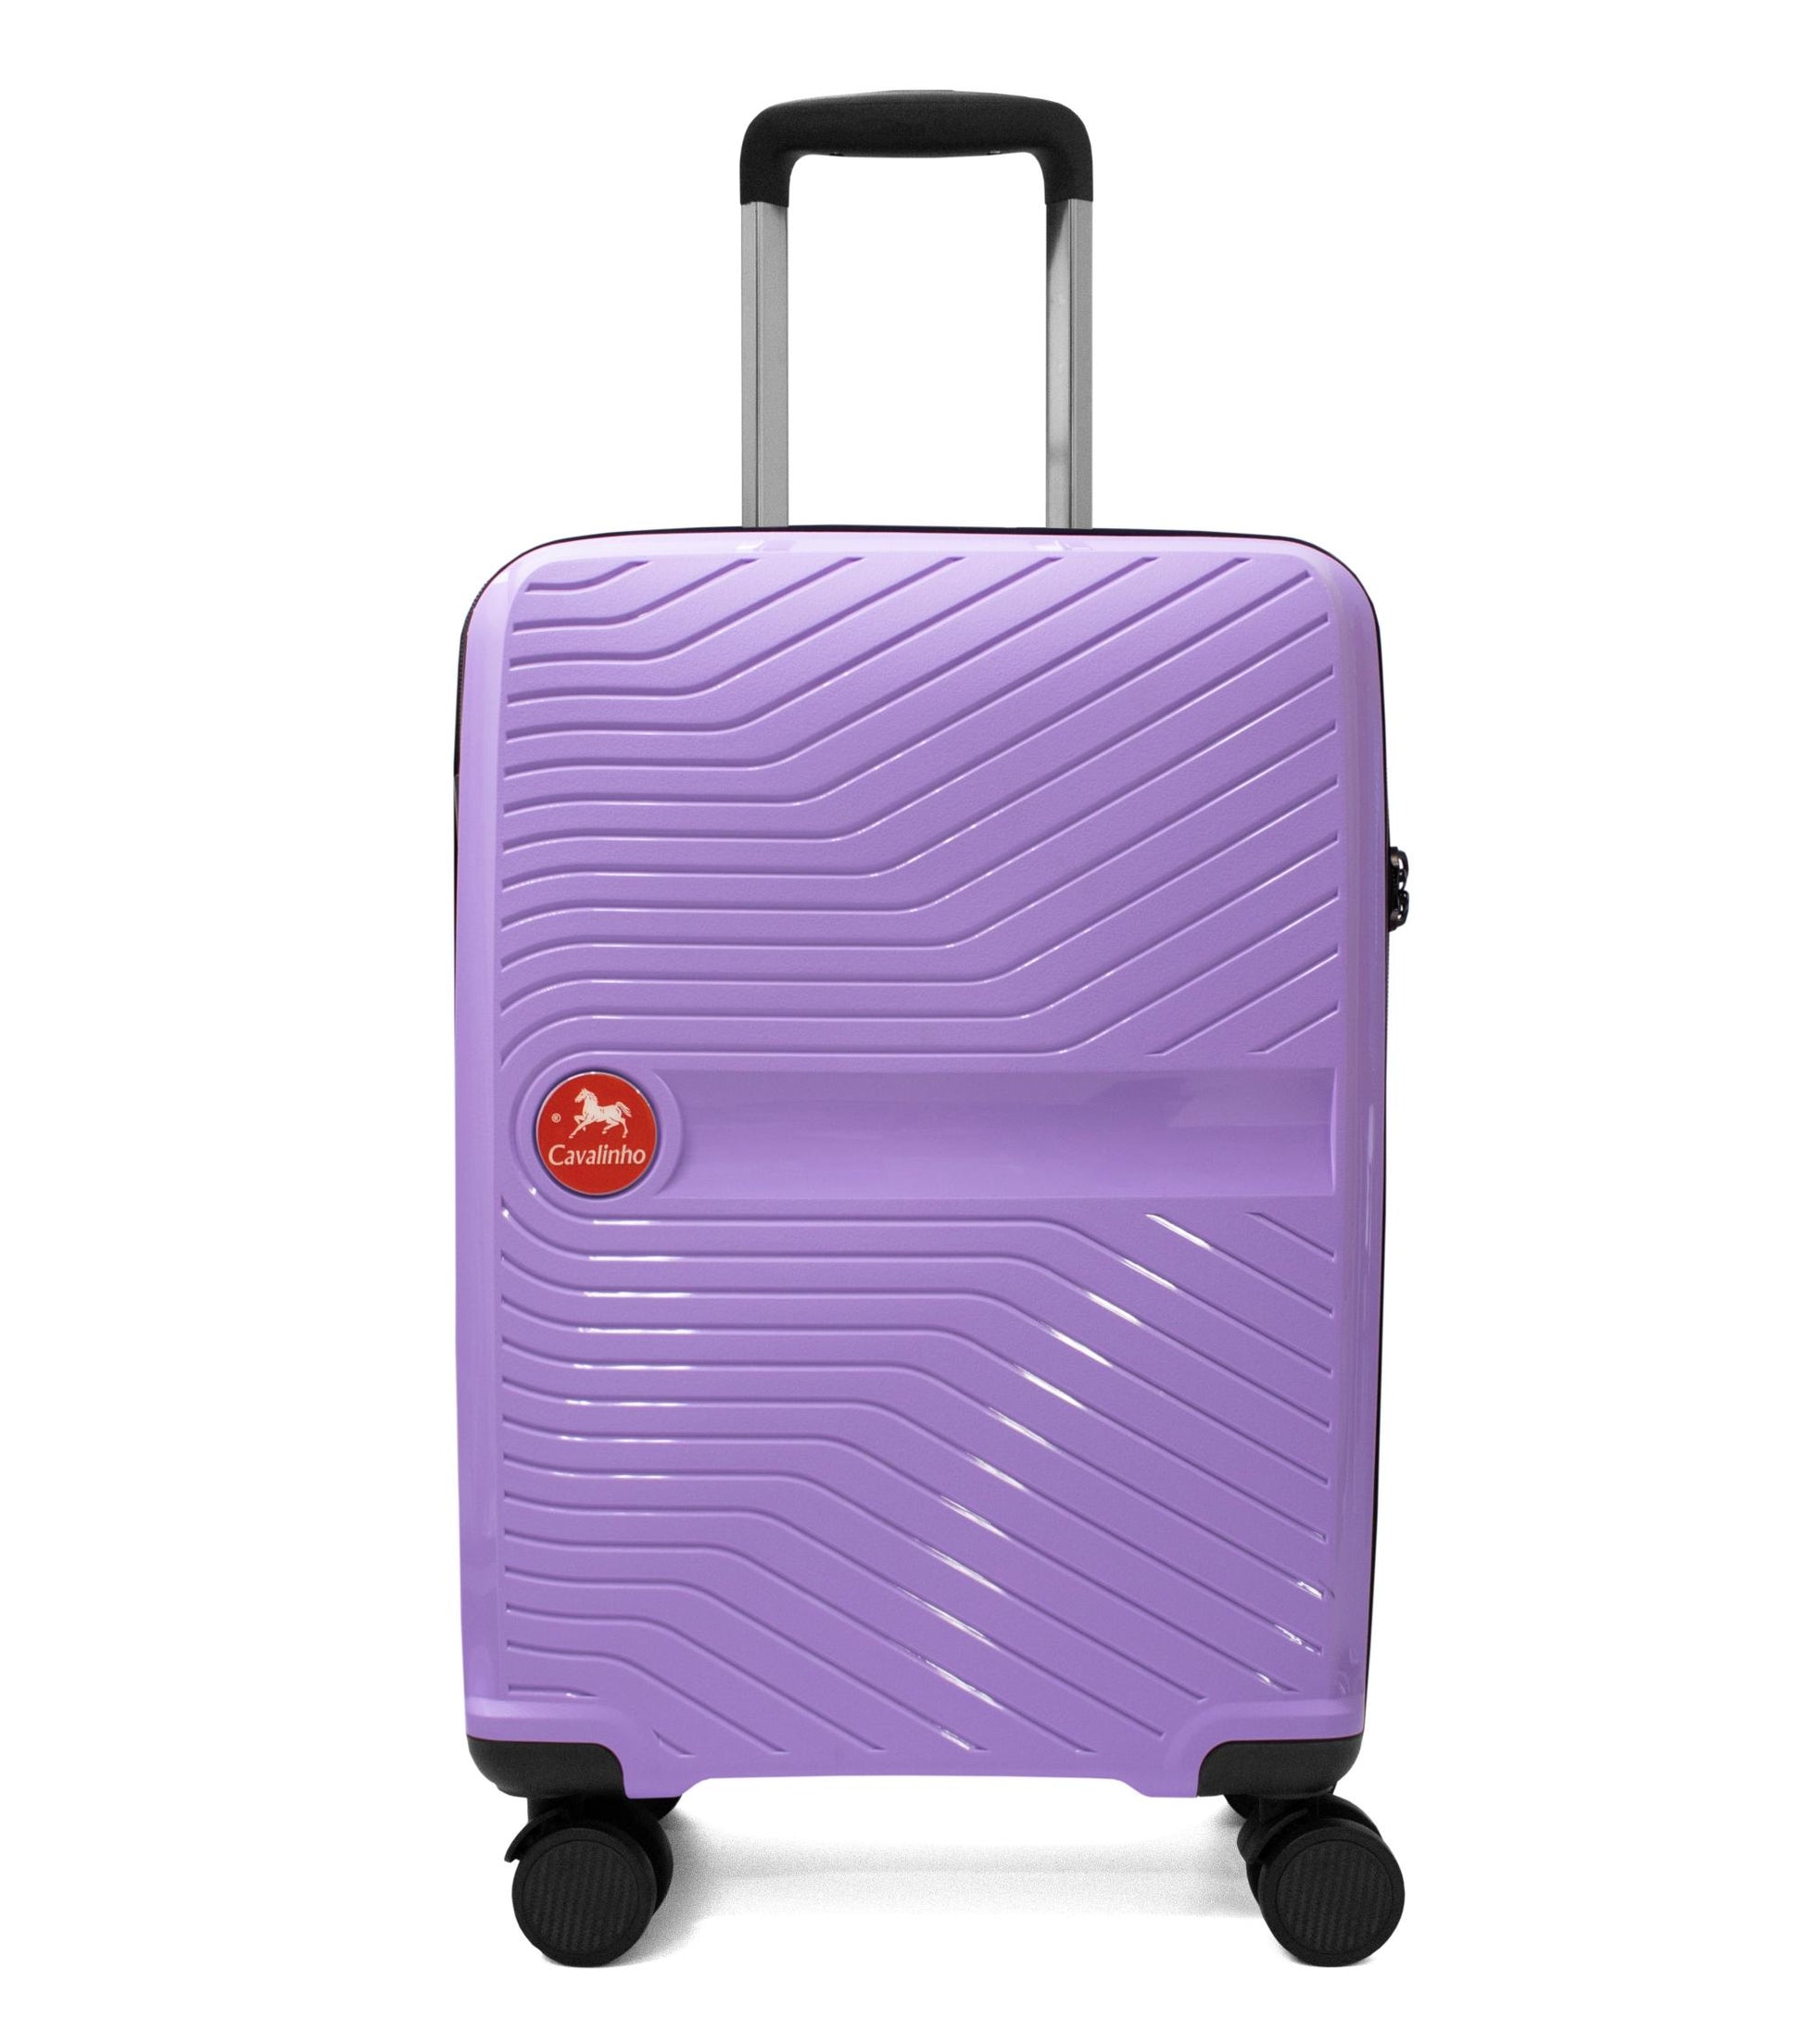 #color_ 19 inch Lilac | Cavalinho Colorful Carry-on Hardside Luggage (19") - 19 inch Lilac - 68020004.39.19_1